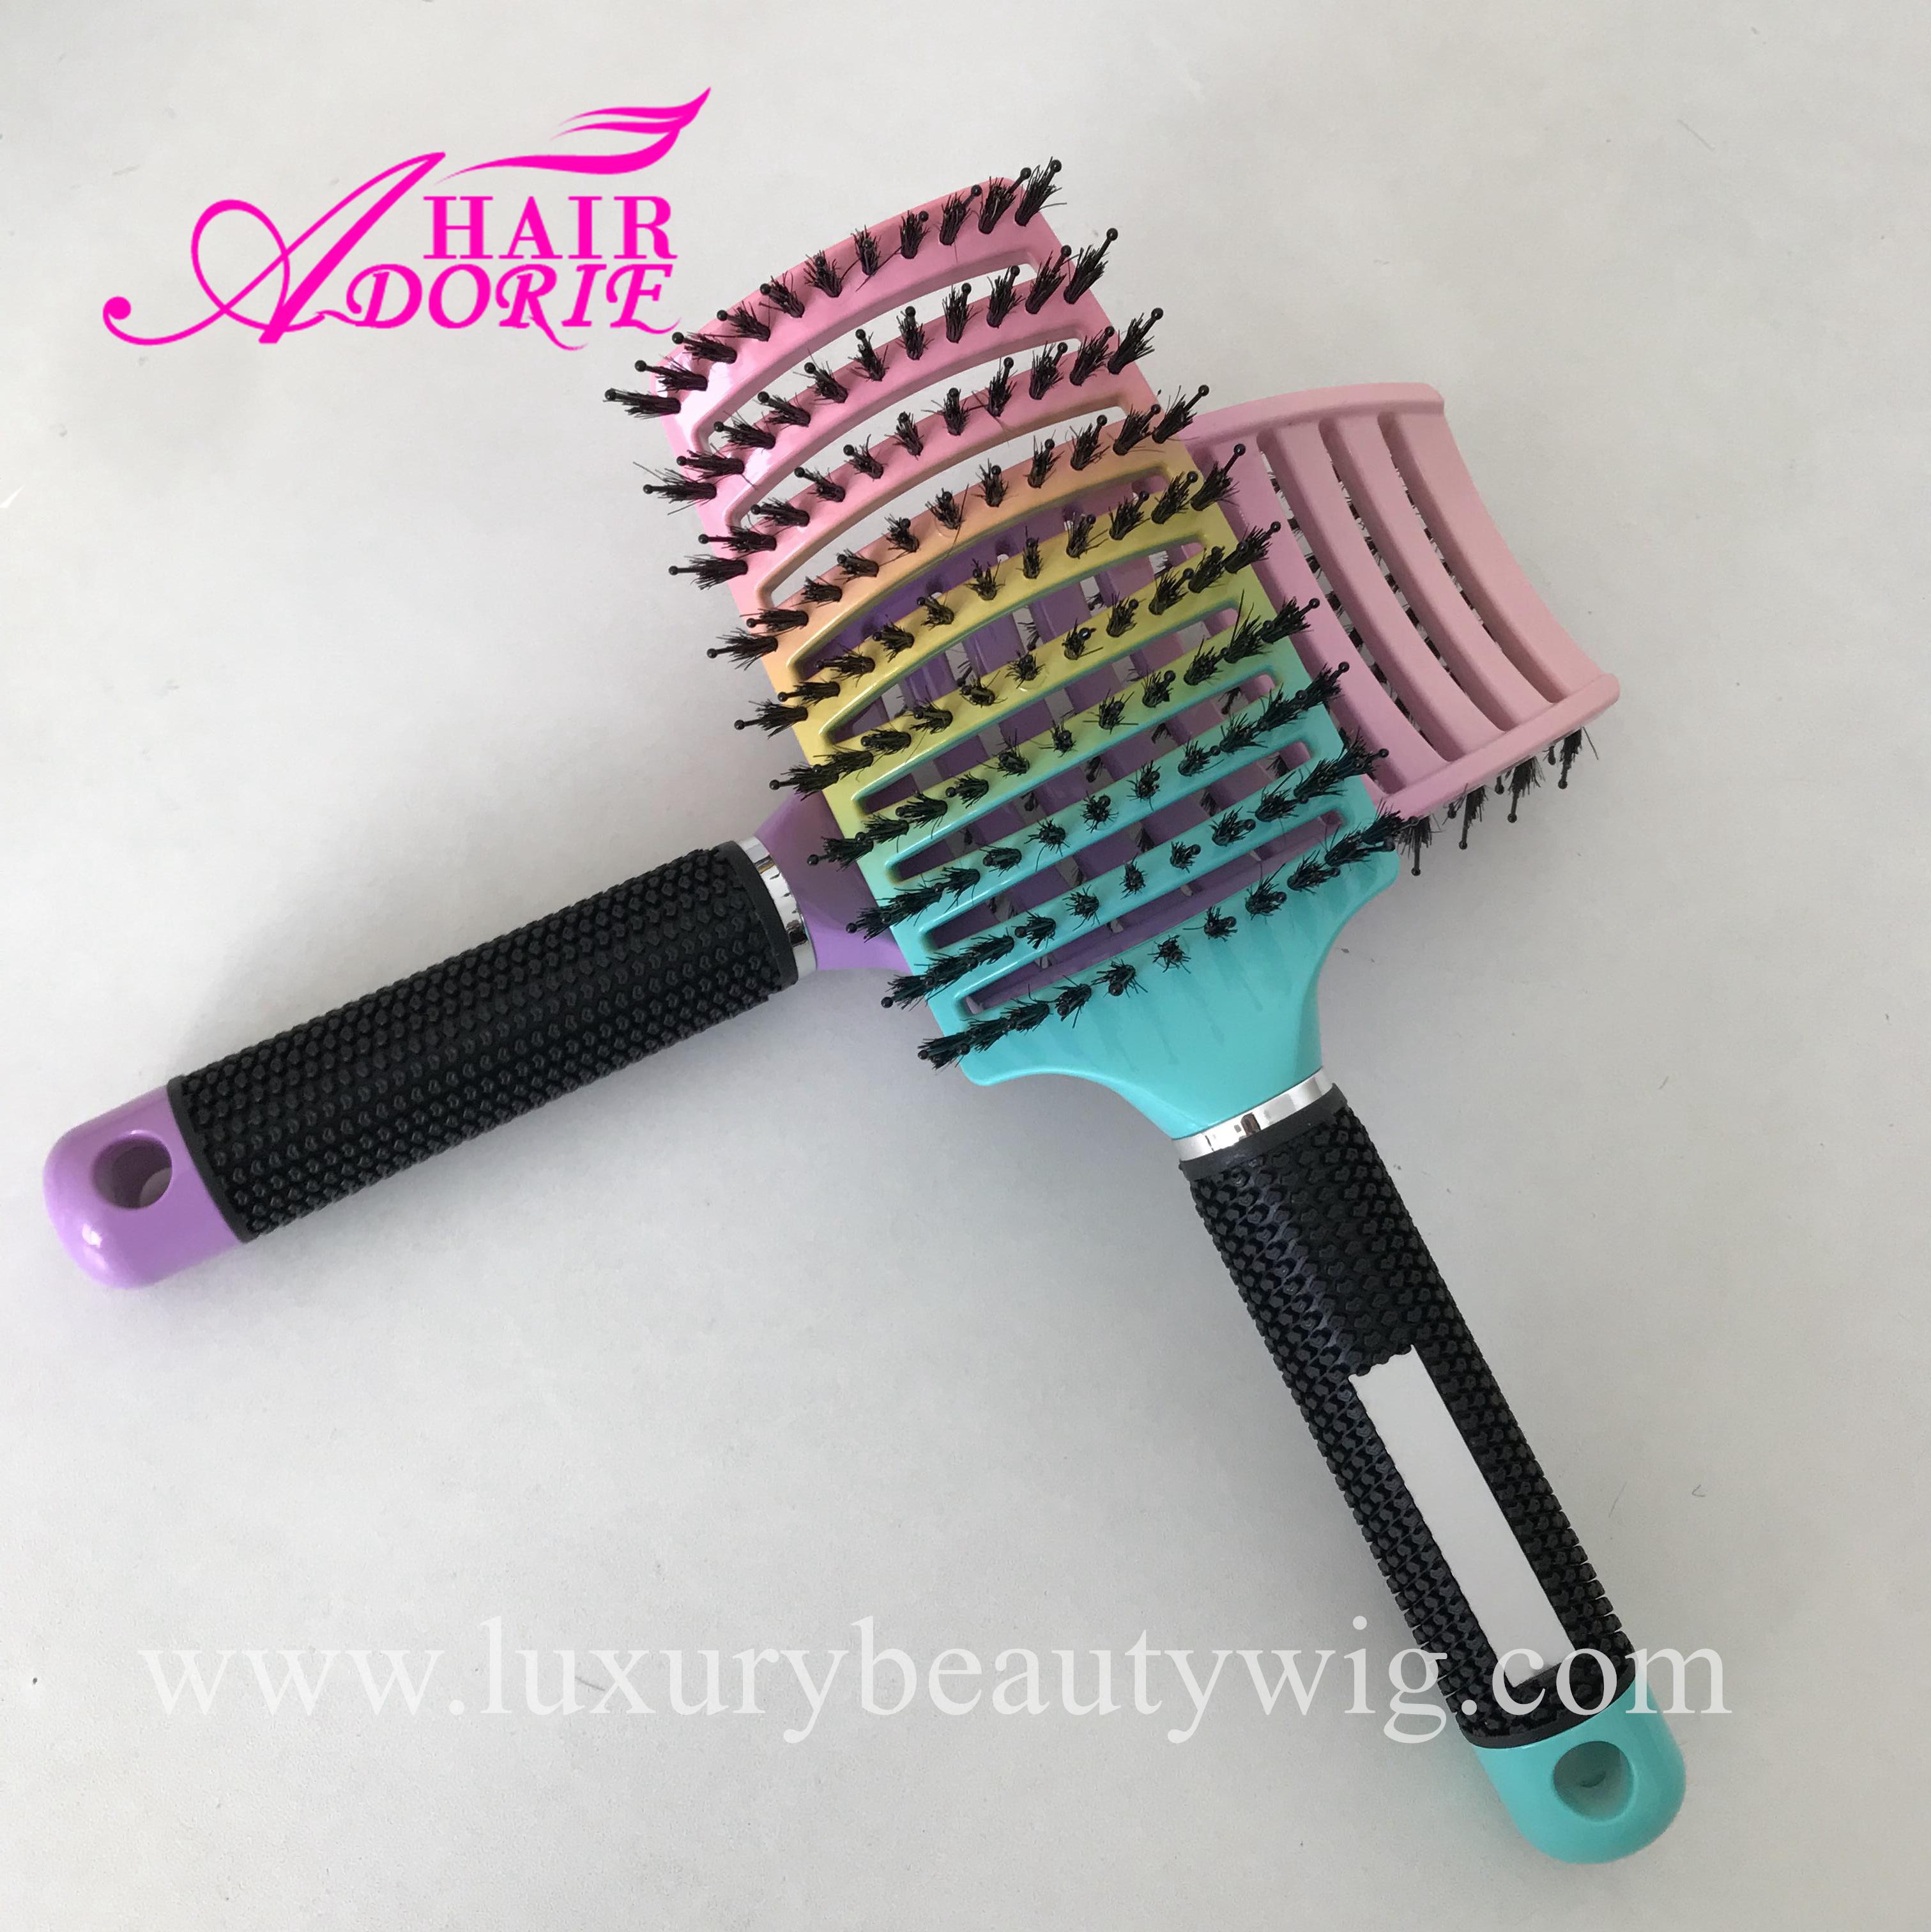  Hair Brush Curved Vented Professional Detangling Hair Brush for Long/Thick/Thin Curly & Tangled Hair Vent Brush